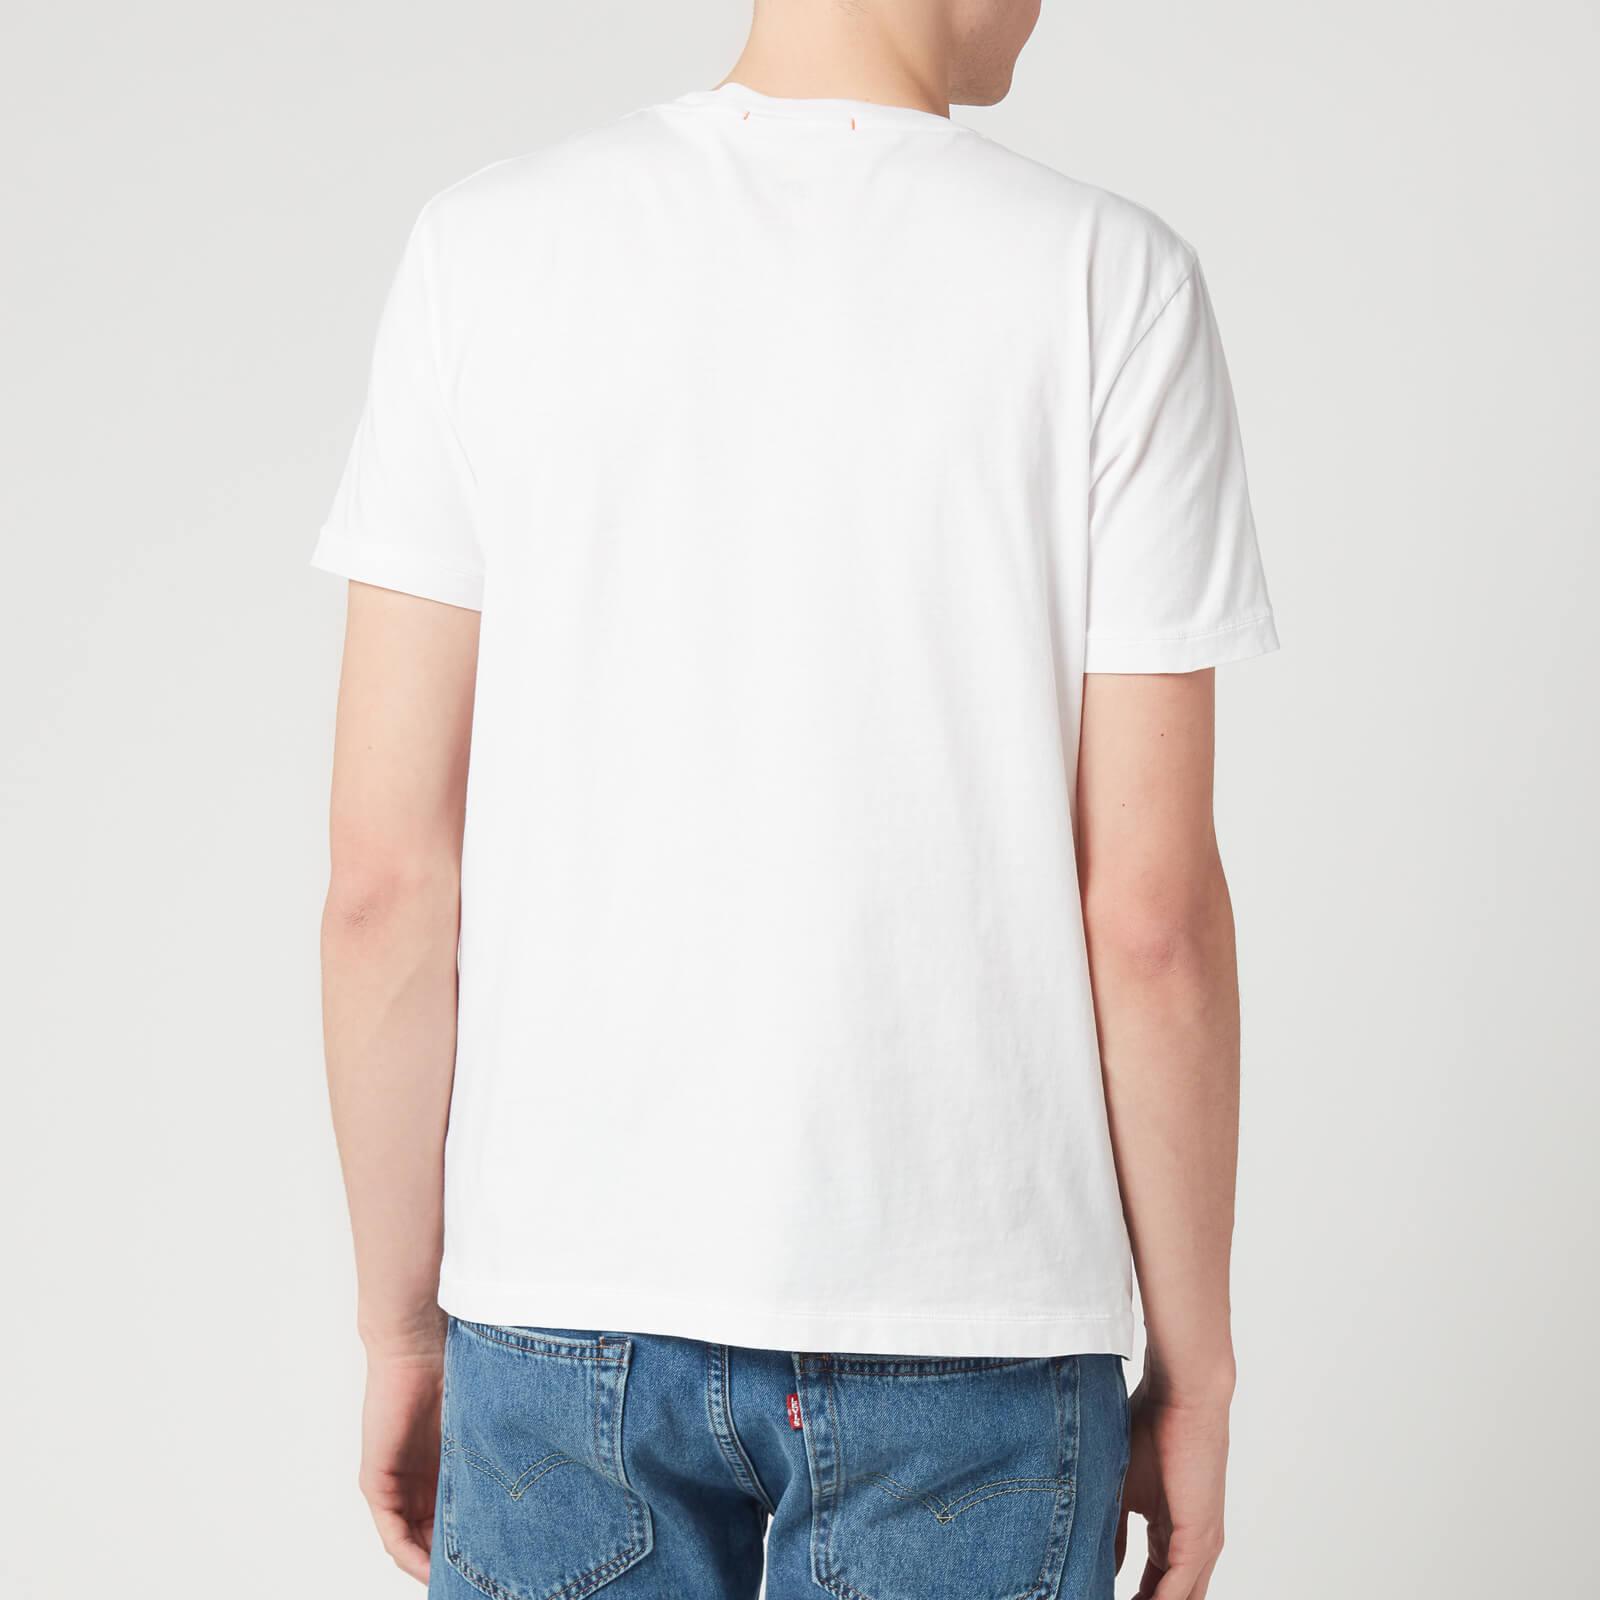 Parajumpers Cotton Patch T-shirt in White for Men - Lyst